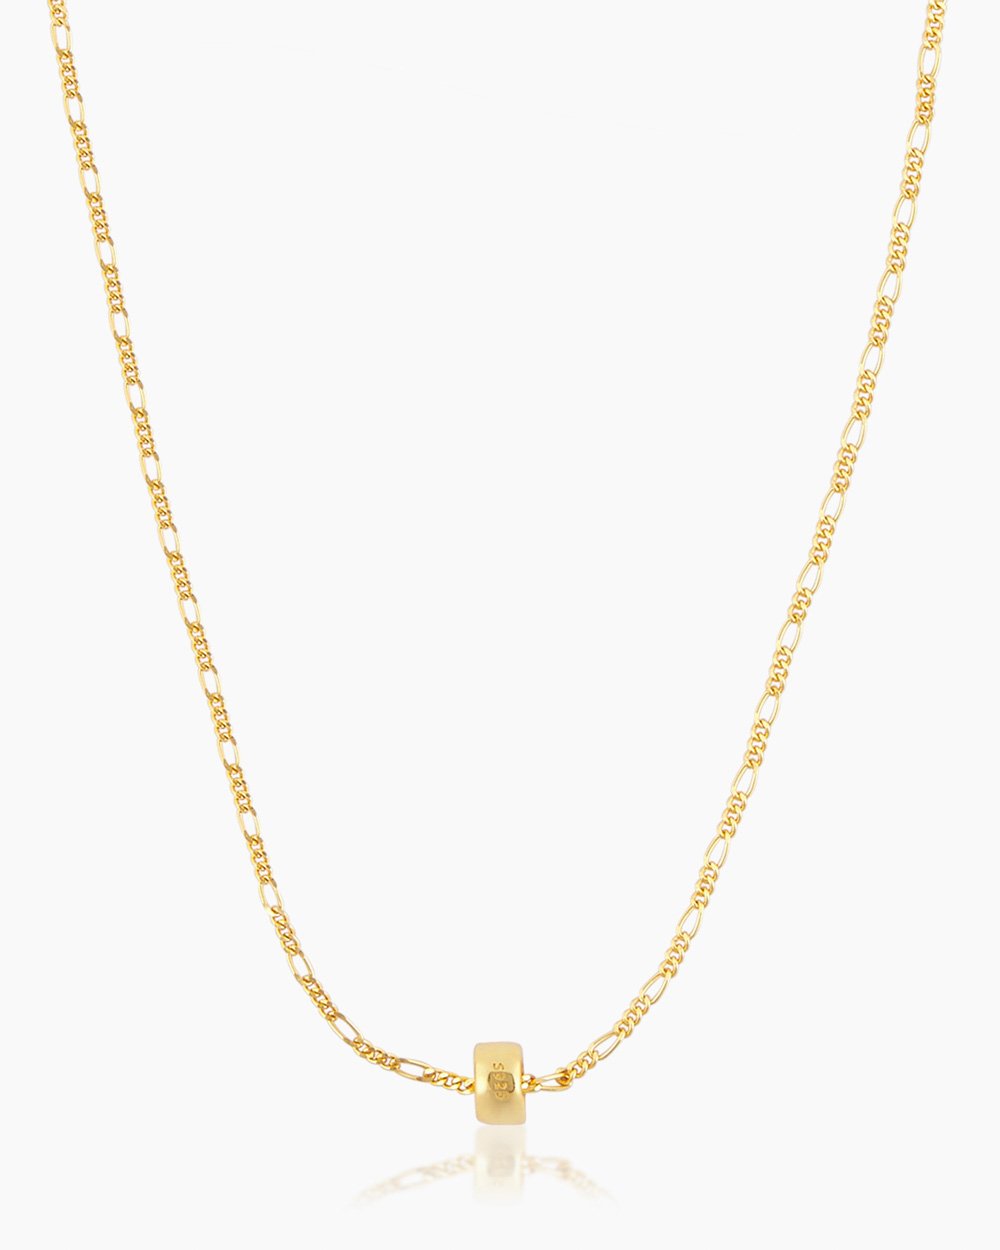 The Erica, a minimalist and ultra-stackable gold necklace with a unique link chain and bead pendant